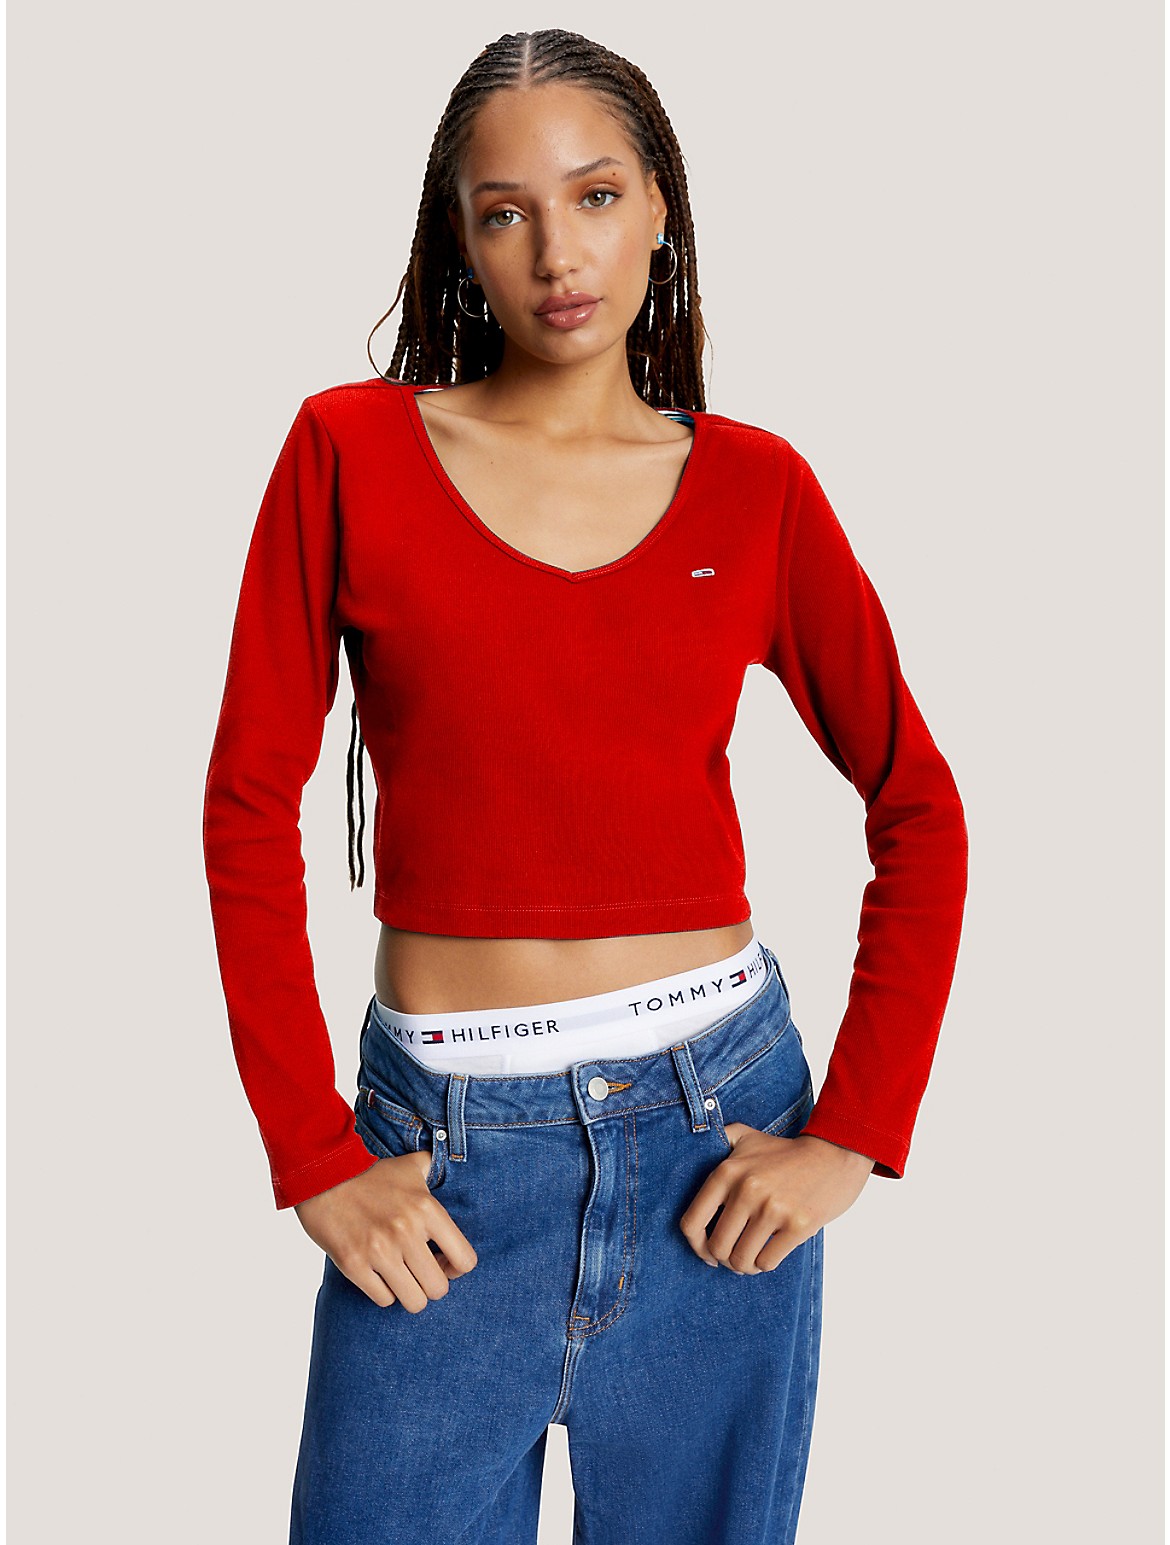 Tommy Hilfiger Women's Slim Fit Ribbed Cropped Baby T-Shirt